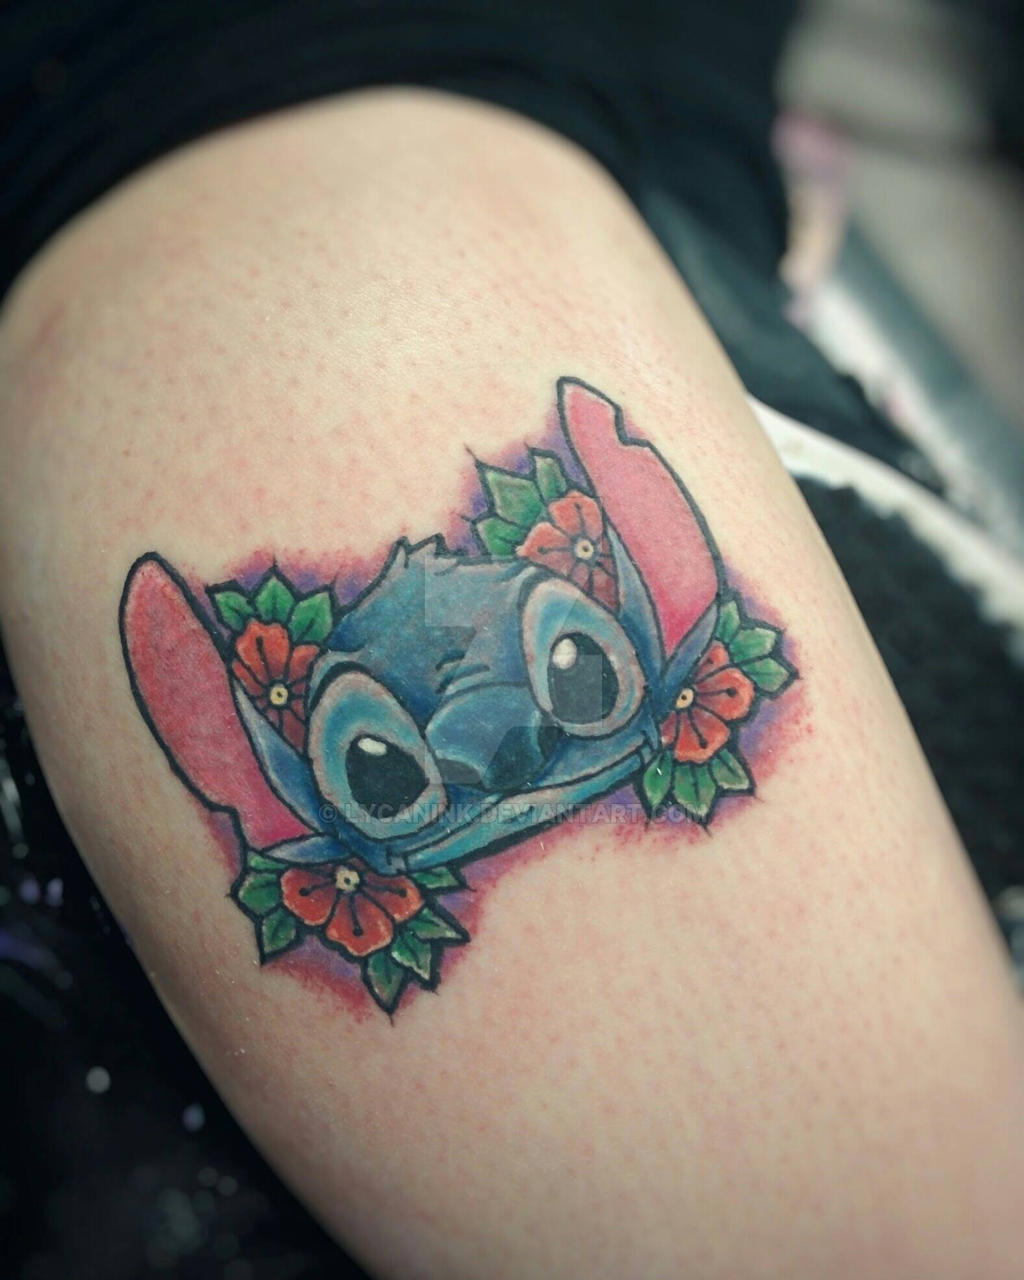 Stitch Traditional Tattoo by LycanInk on DeviantArt